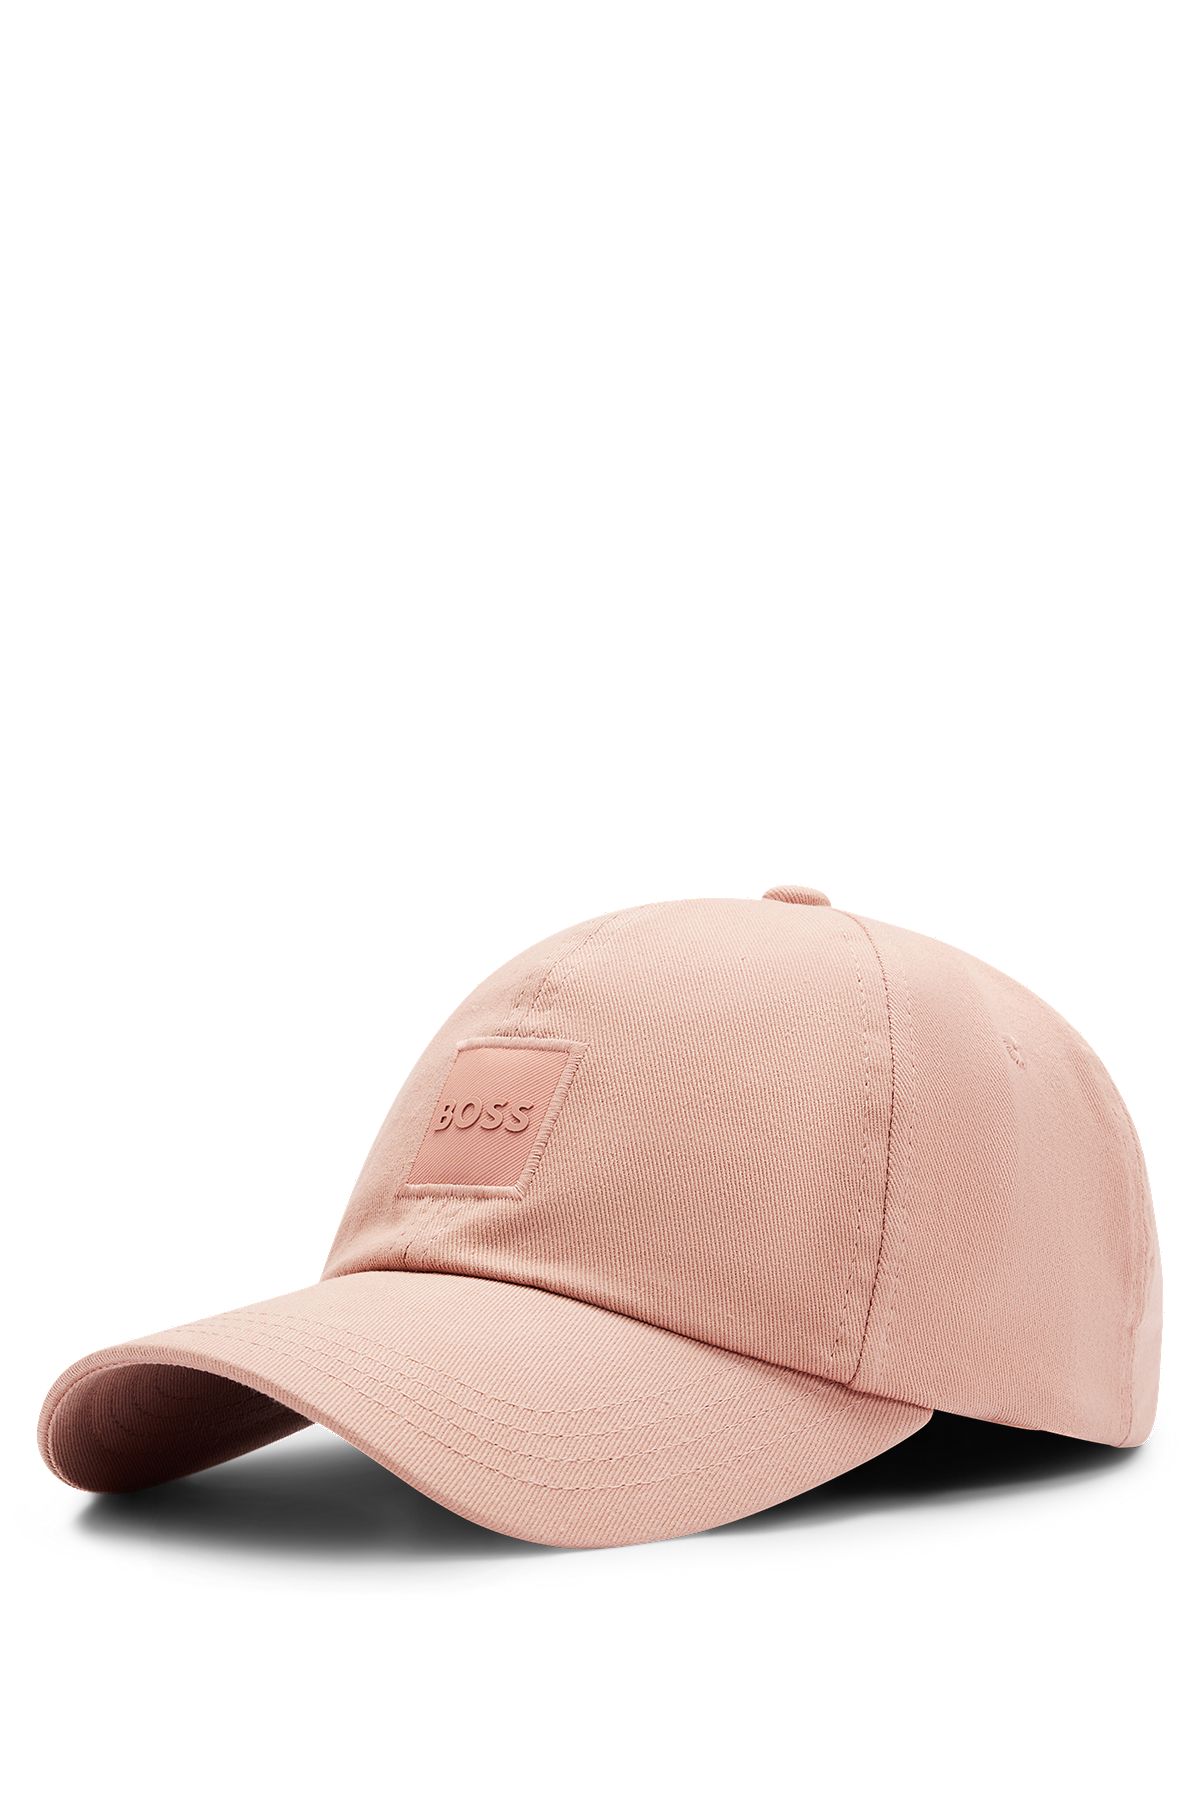 Cotton-twill cap with tonal logo patch, light pink